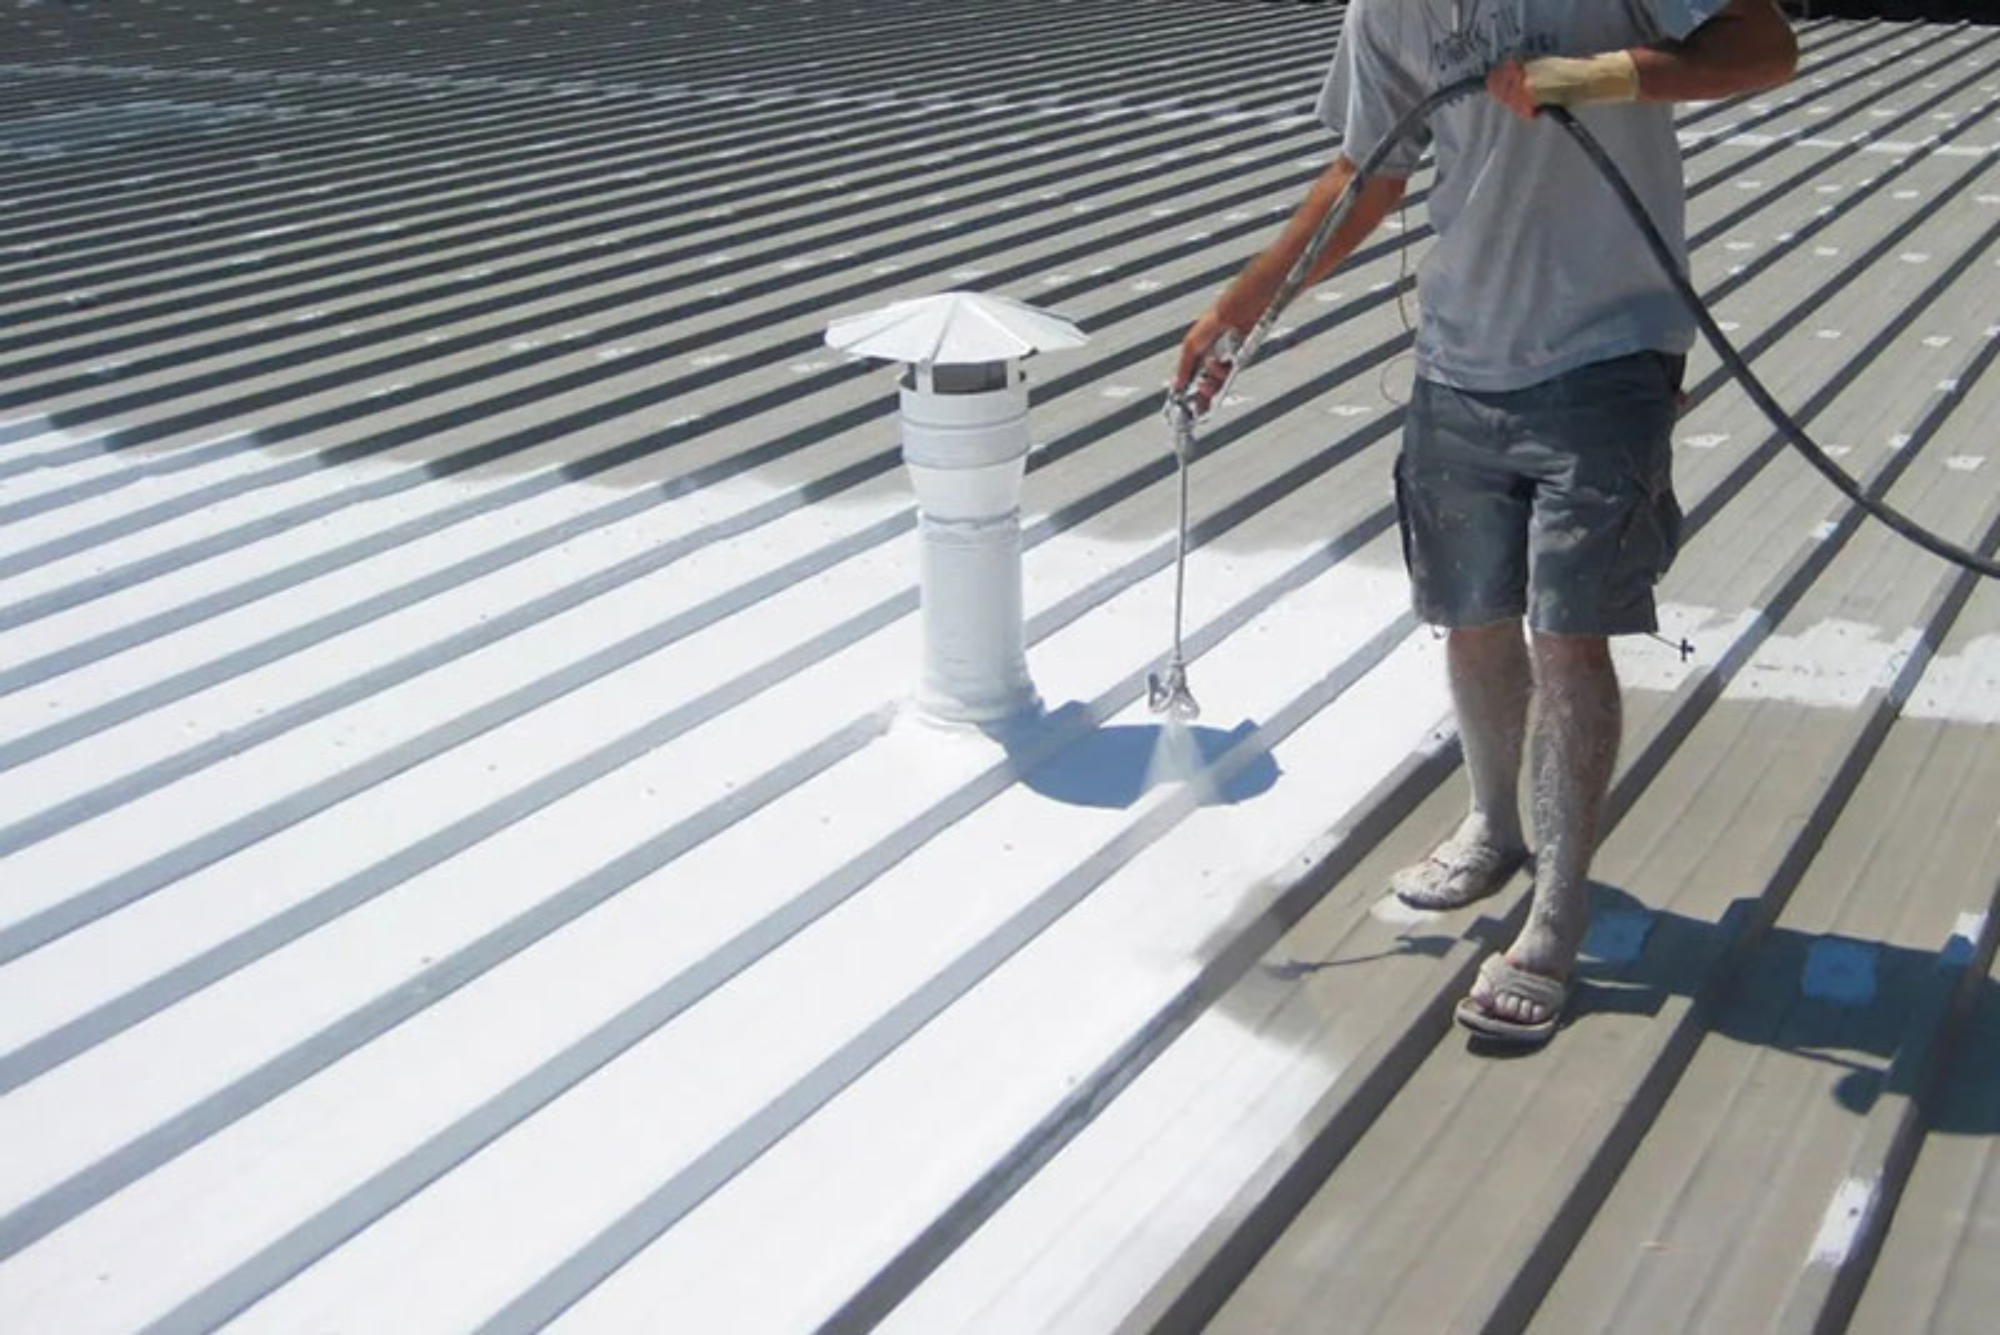 New curing agent makes elastomeric roof coatings more transparent and corrosion-resistant